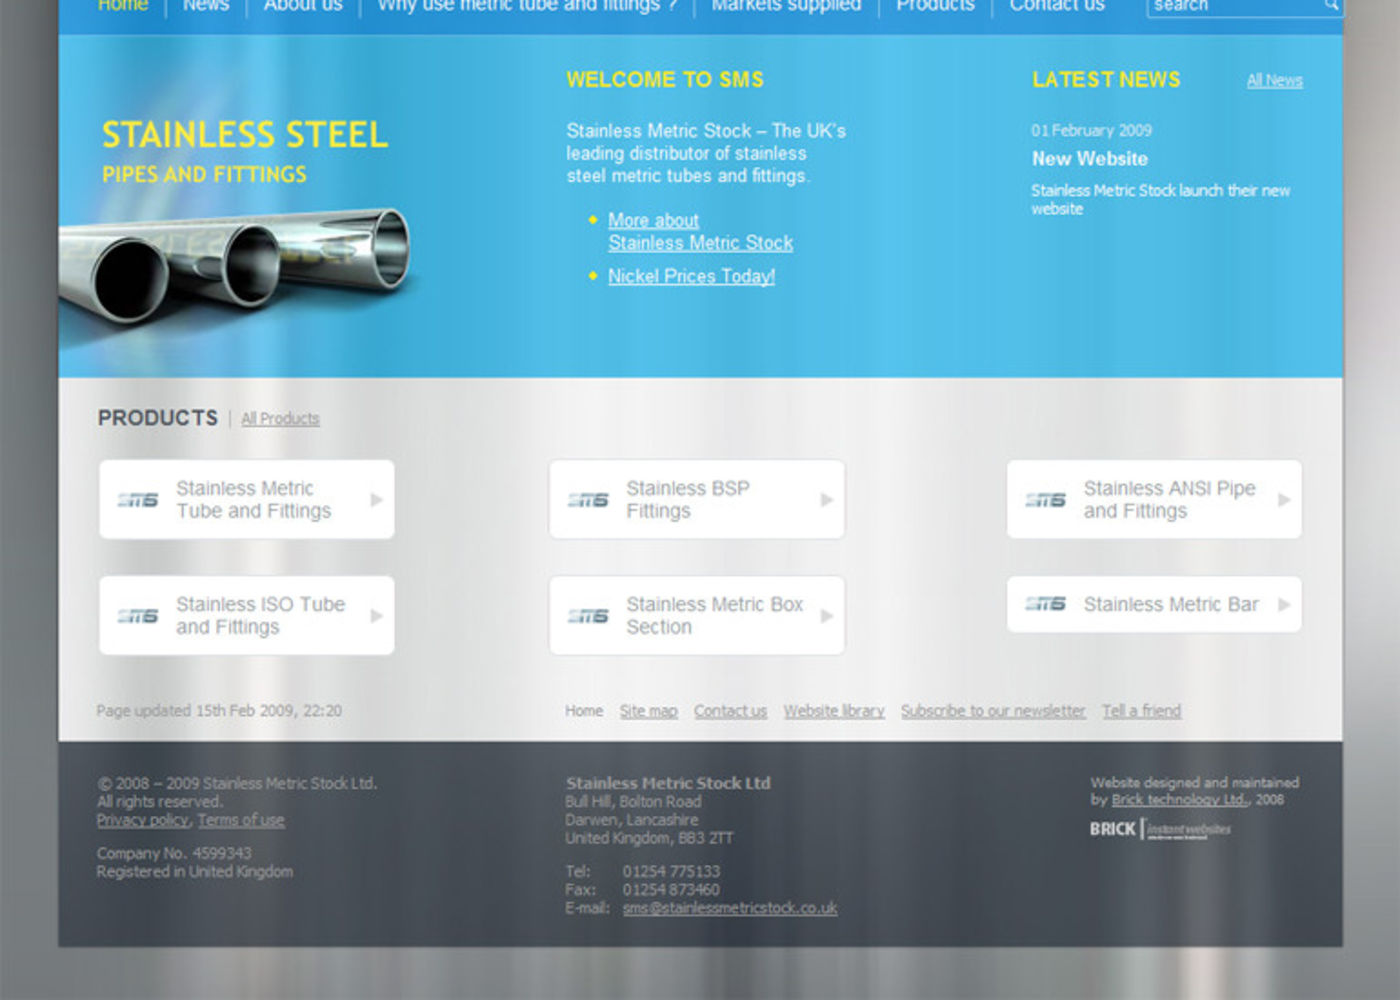 Stainless Metric Stock Homepage footer - SMS Ltd